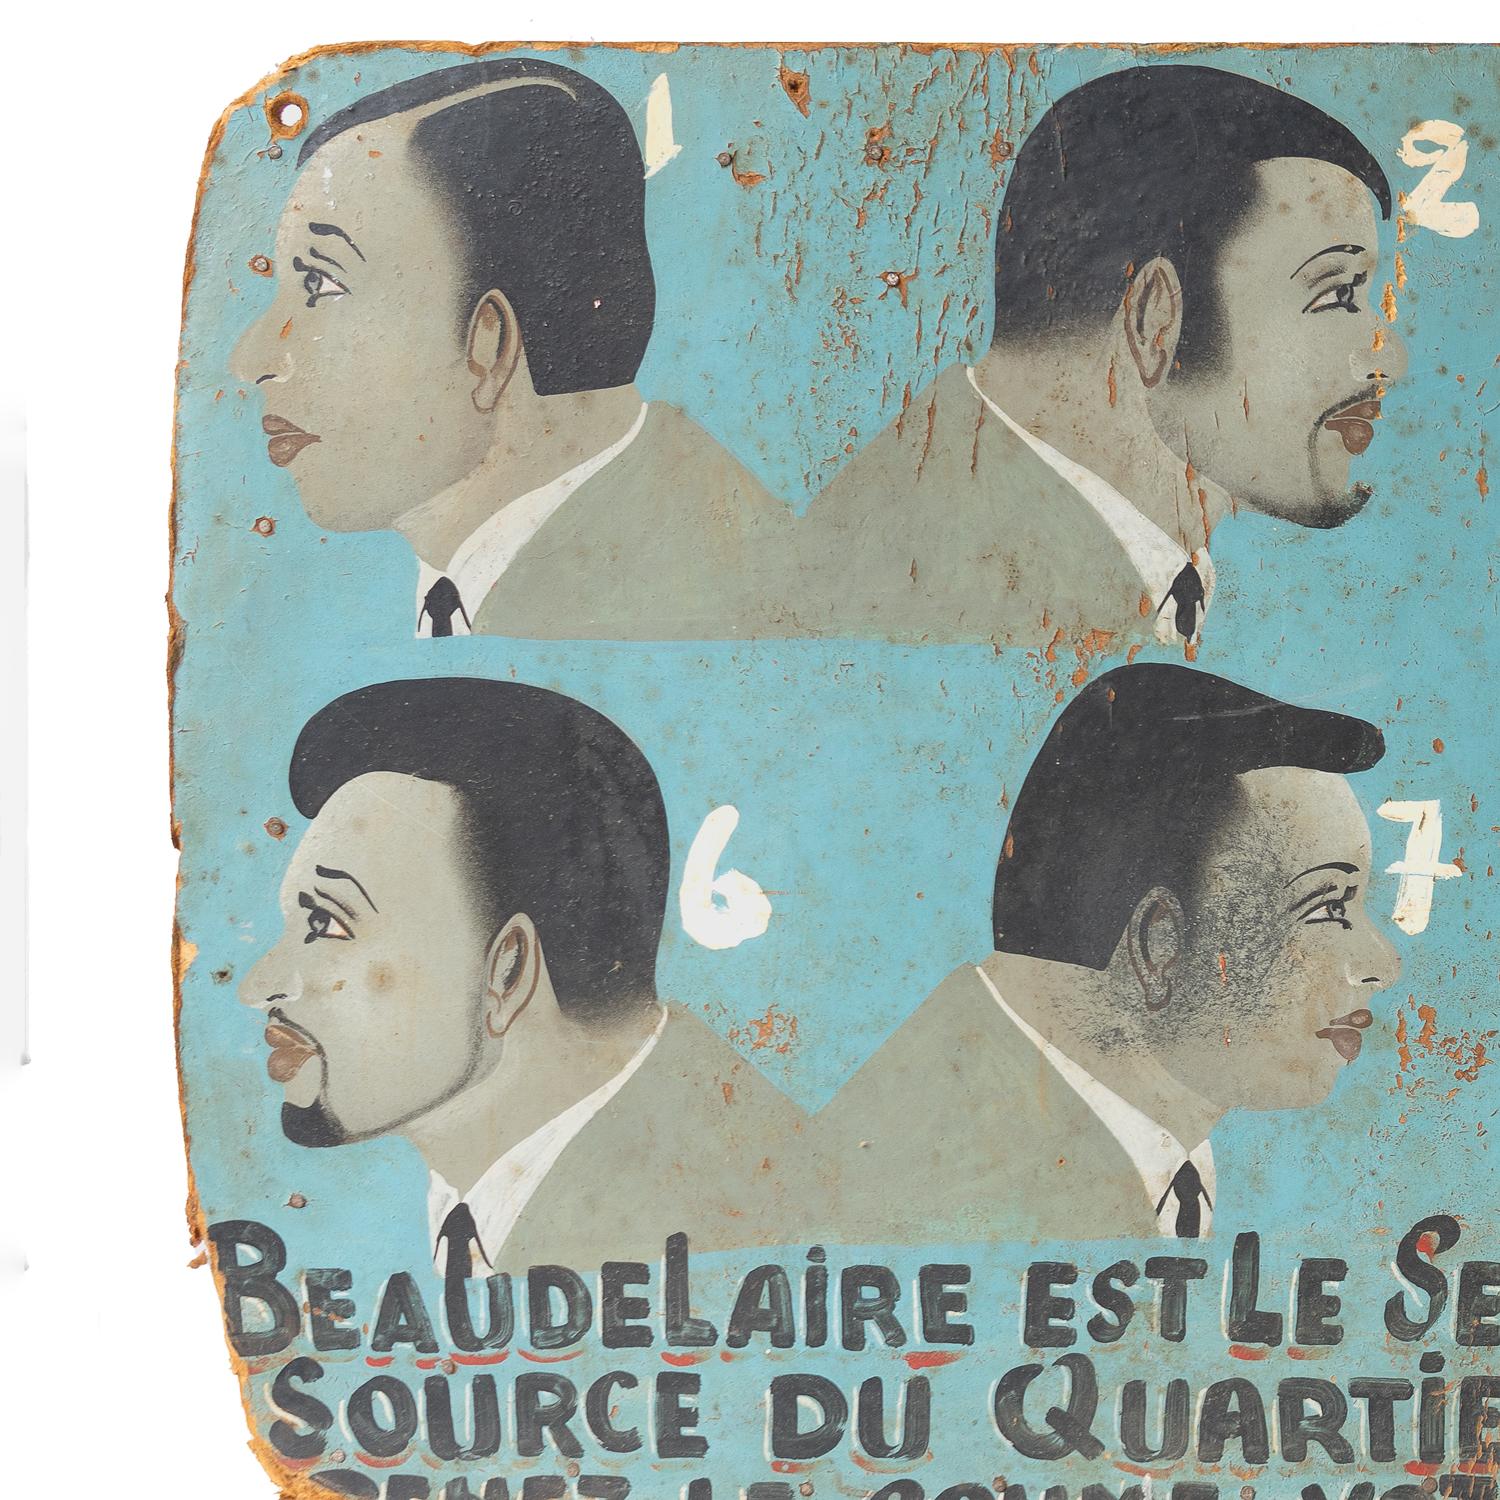 MID-CENTURY ADVERTISING 

Depicting ten different numbered looks for different haircuts to choose from at the barbershop.

Completely hand-painted in a wonderful folk art style with a monochrome palette on a blue background. 

Script in French